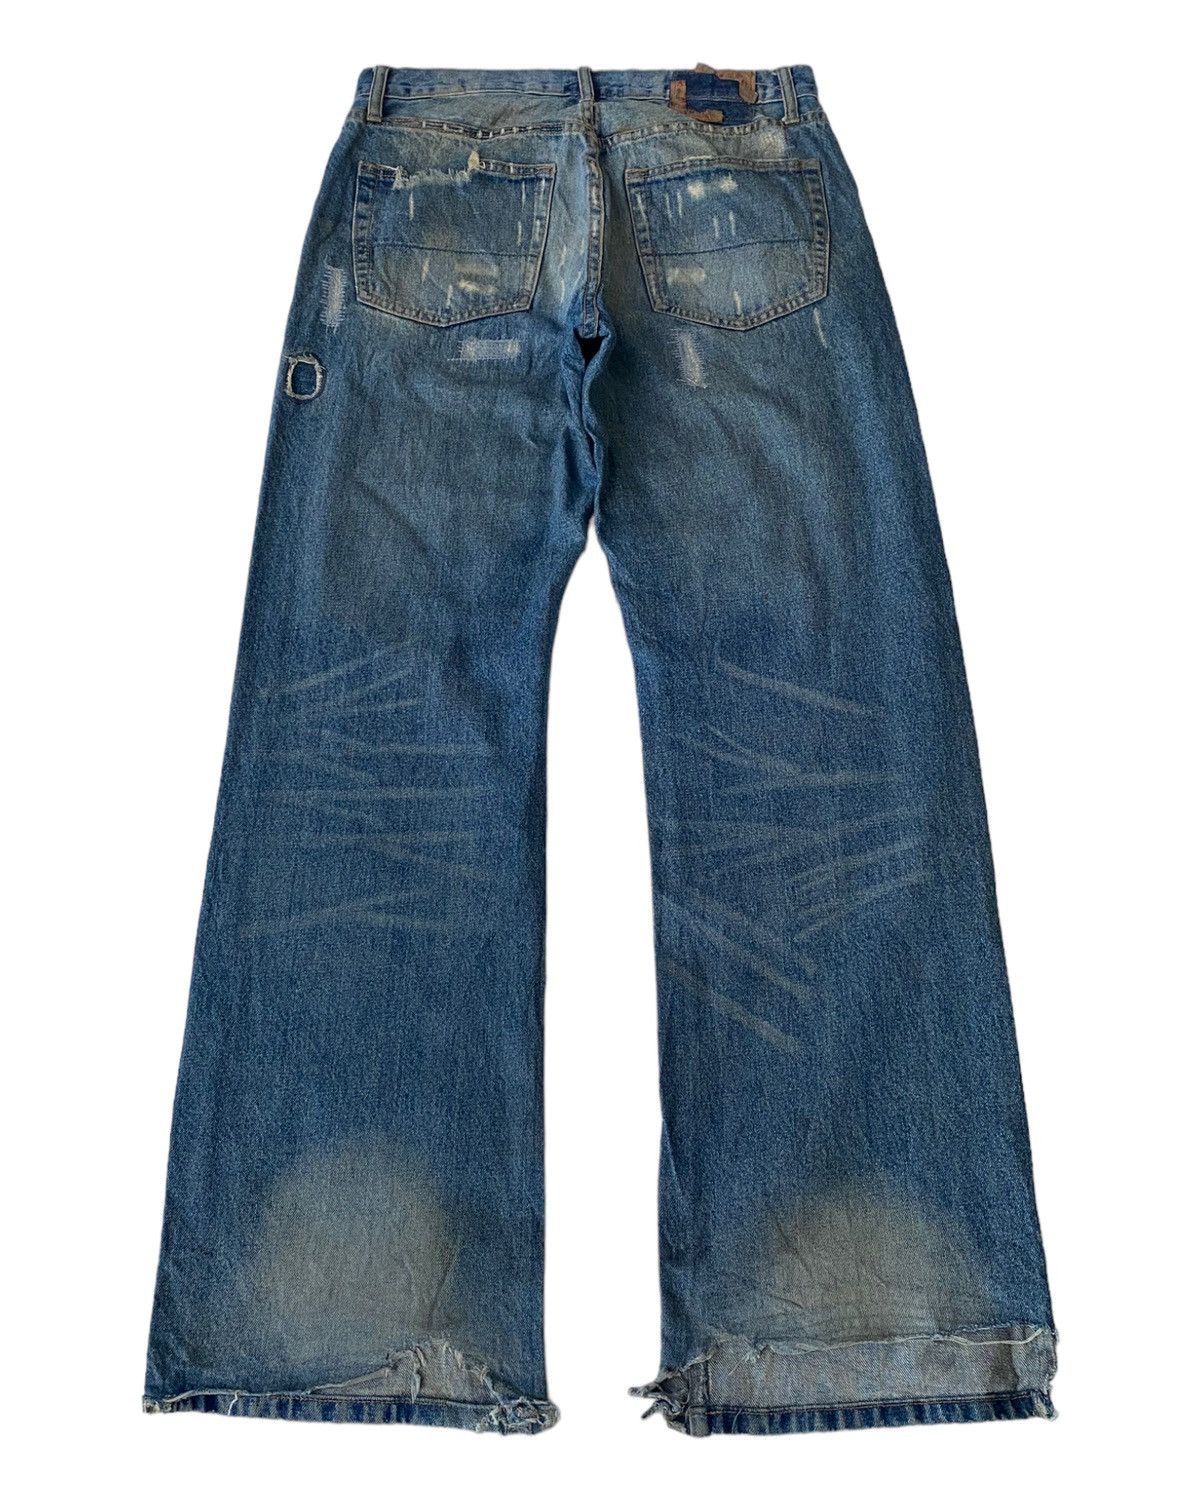 🔥FLARE JEANS RUSTY BAGGY ABERCROMBIE & FITCH DISTRESS DENIM - 9